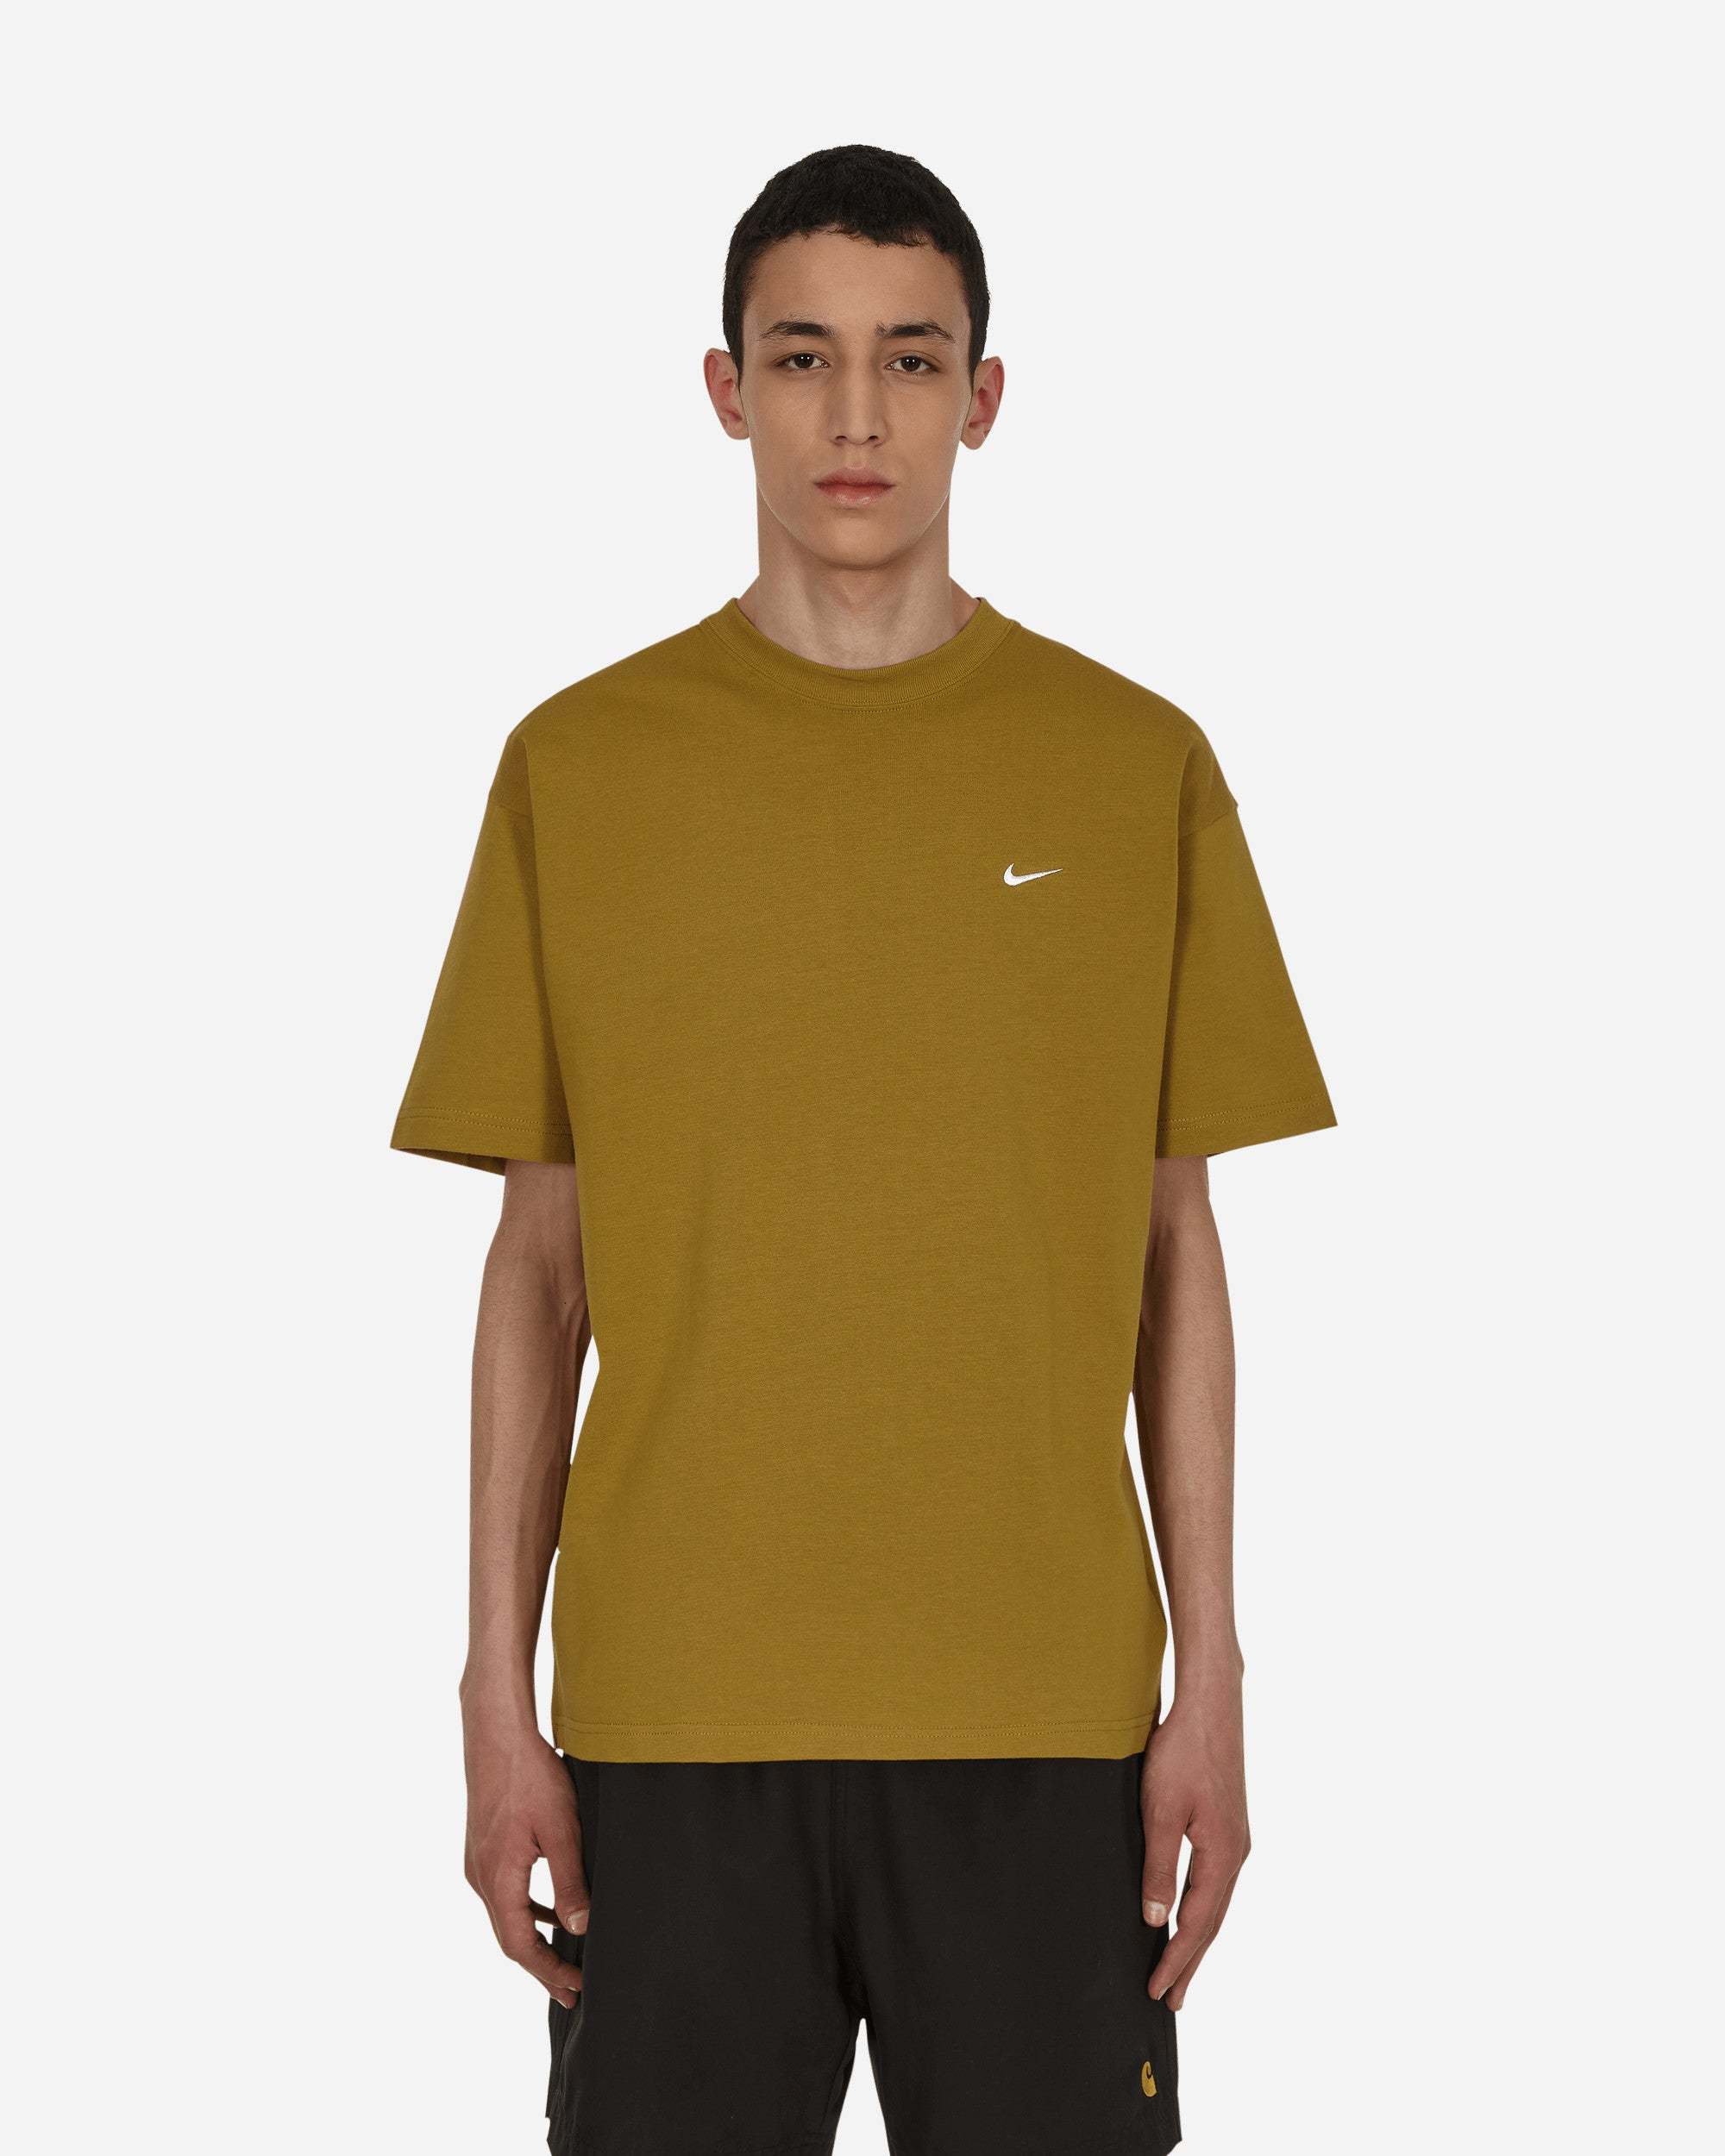 Solo Swoosh T Shirt Nike Special Project